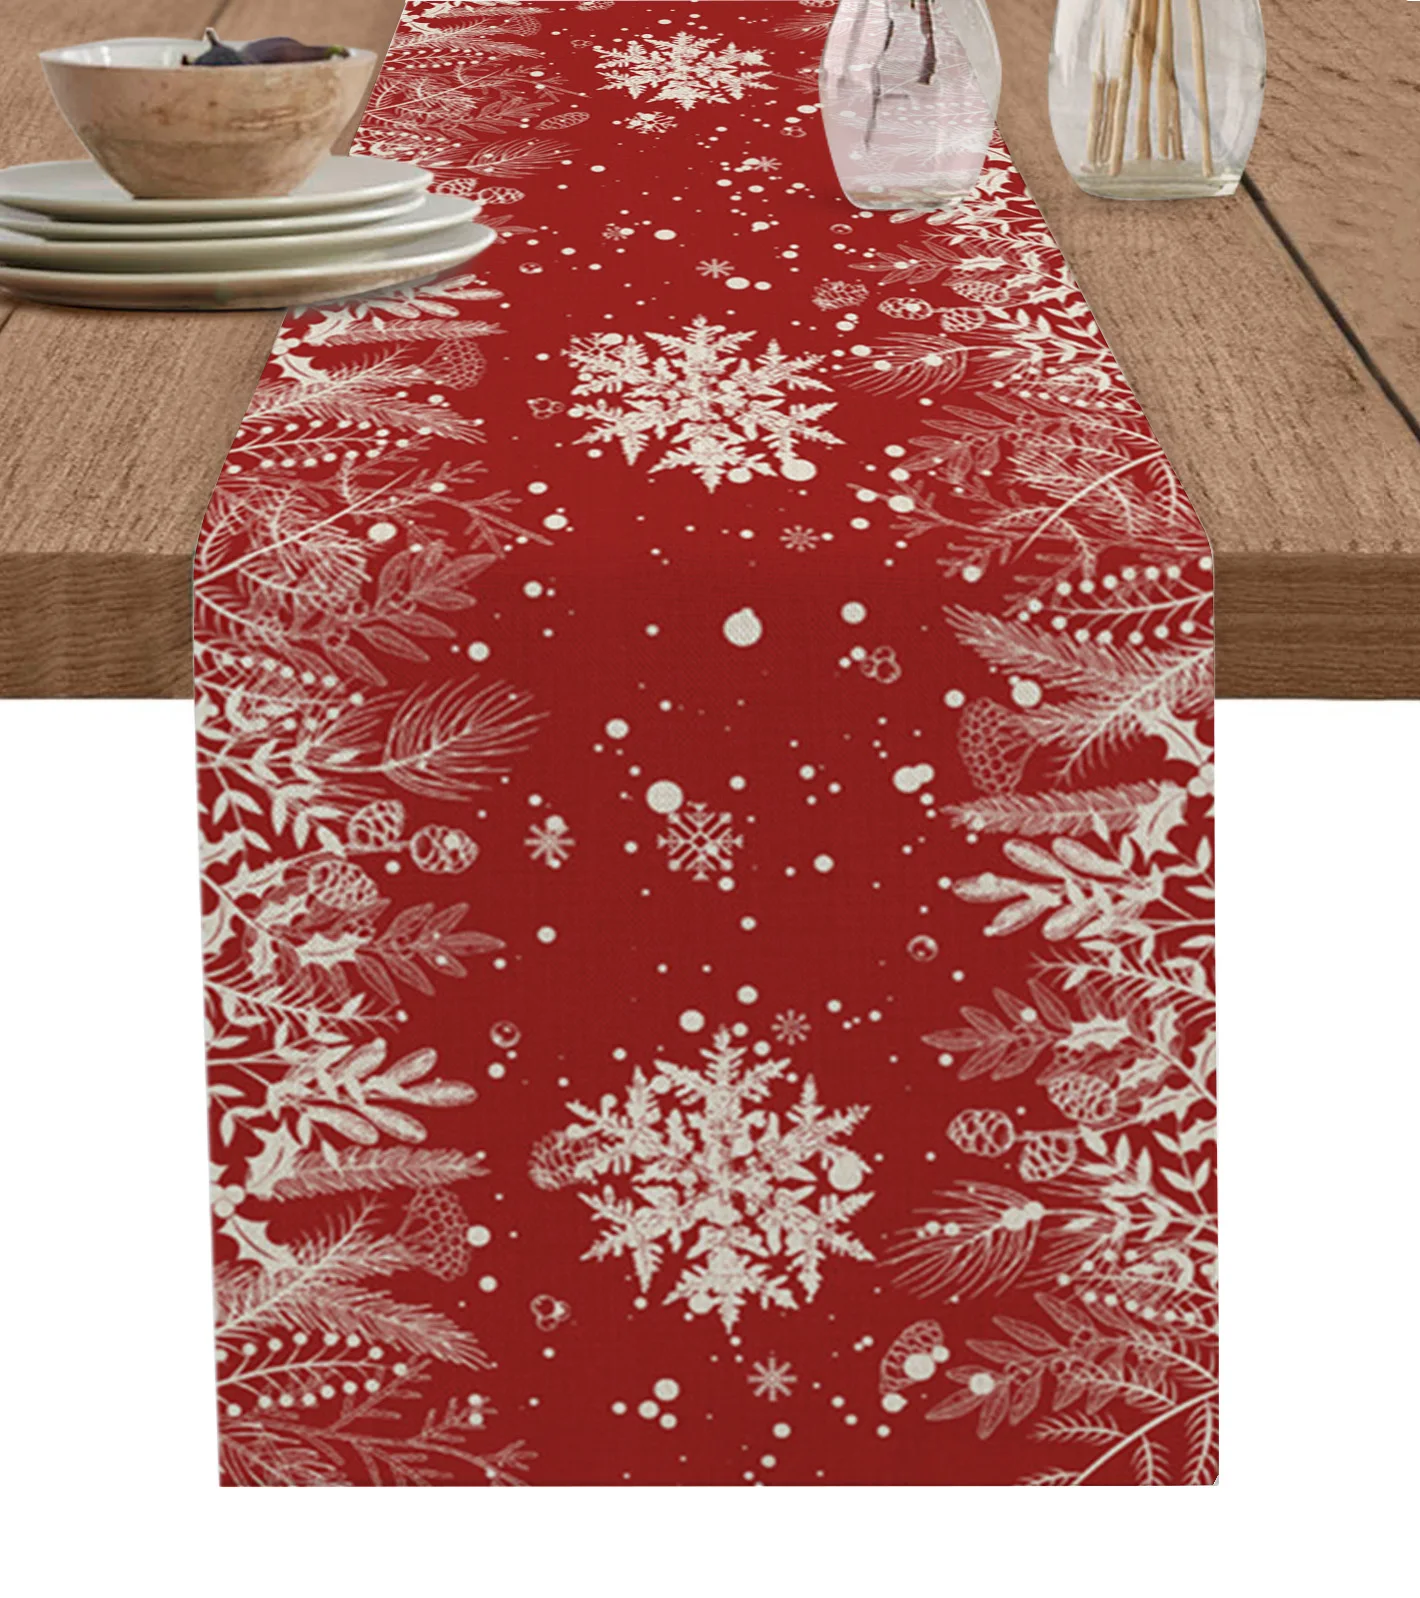 

Christmas Snowflake Plant Pine Leaves Home Dining Room Decor Table Cloth Wedding Christmas Party Table Runners